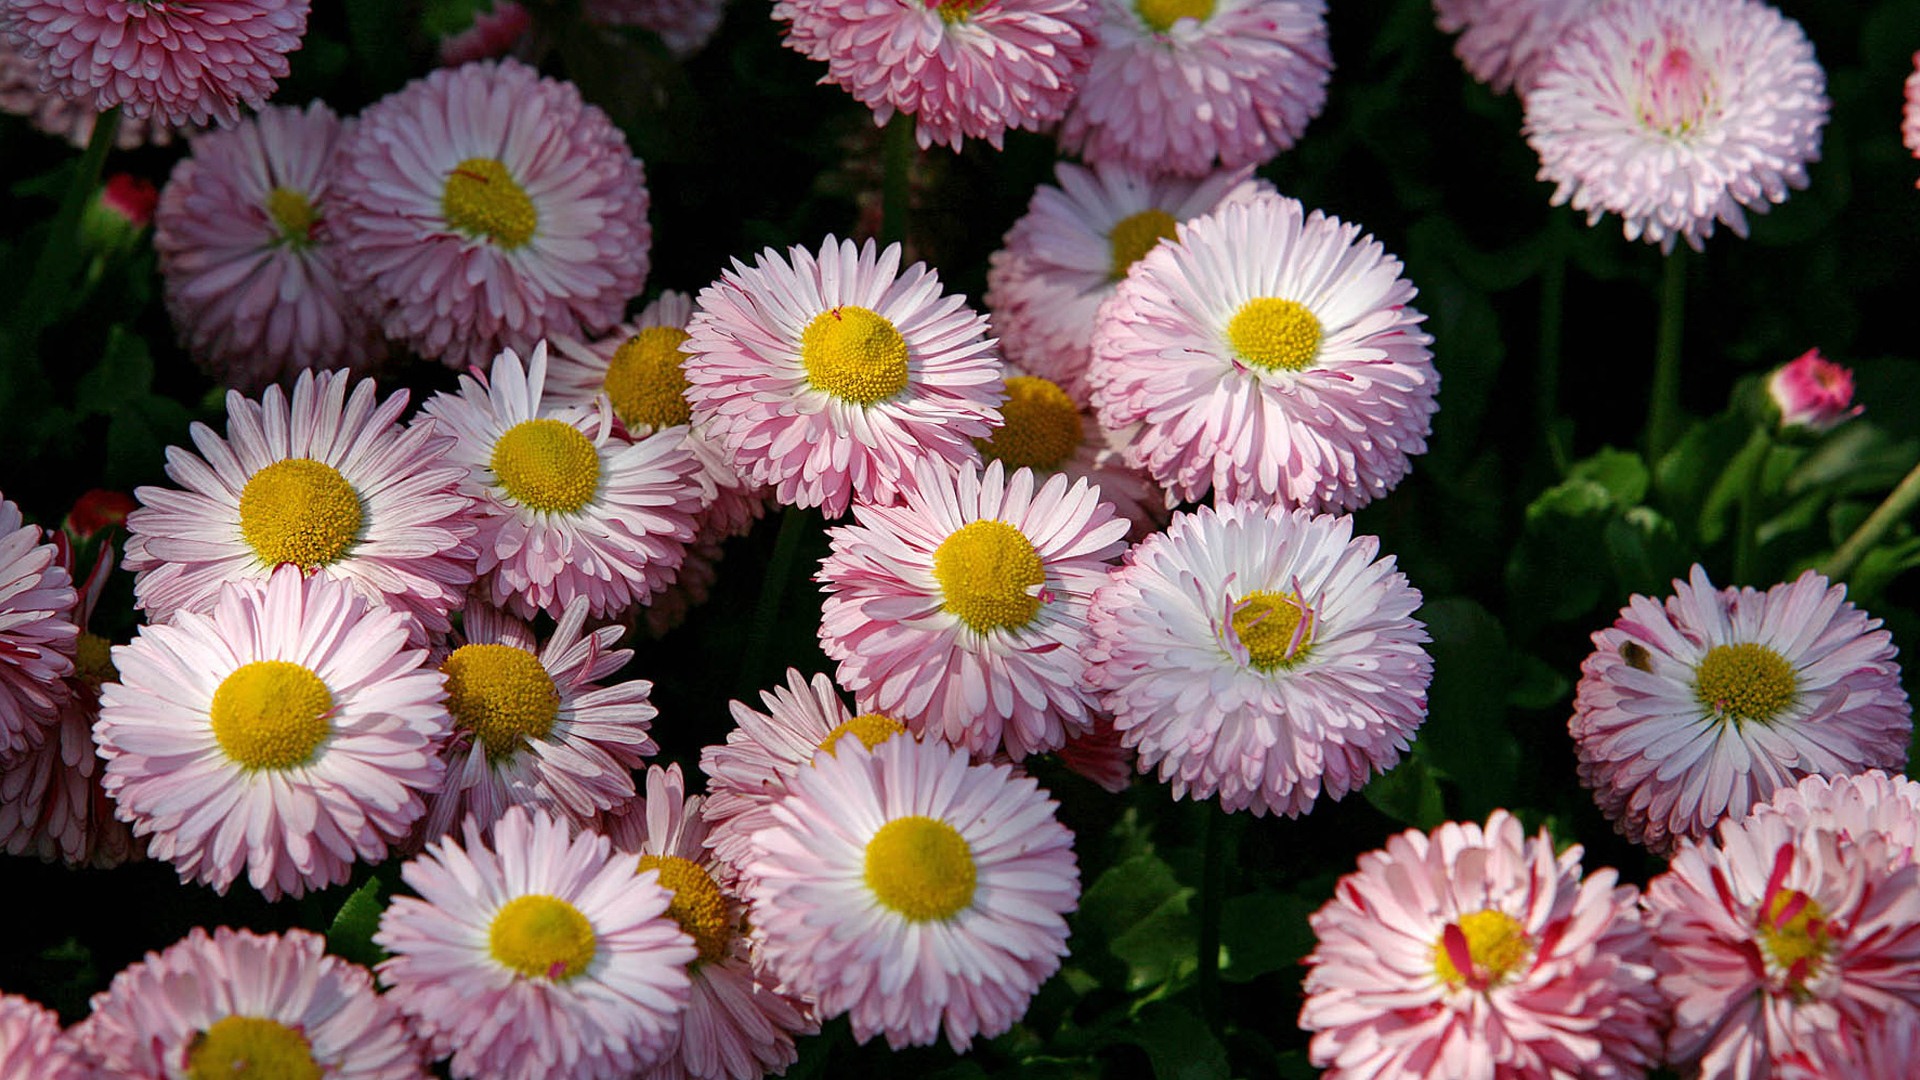 Daisies flowers close-up HD wallpapers #15 - 1920x1080